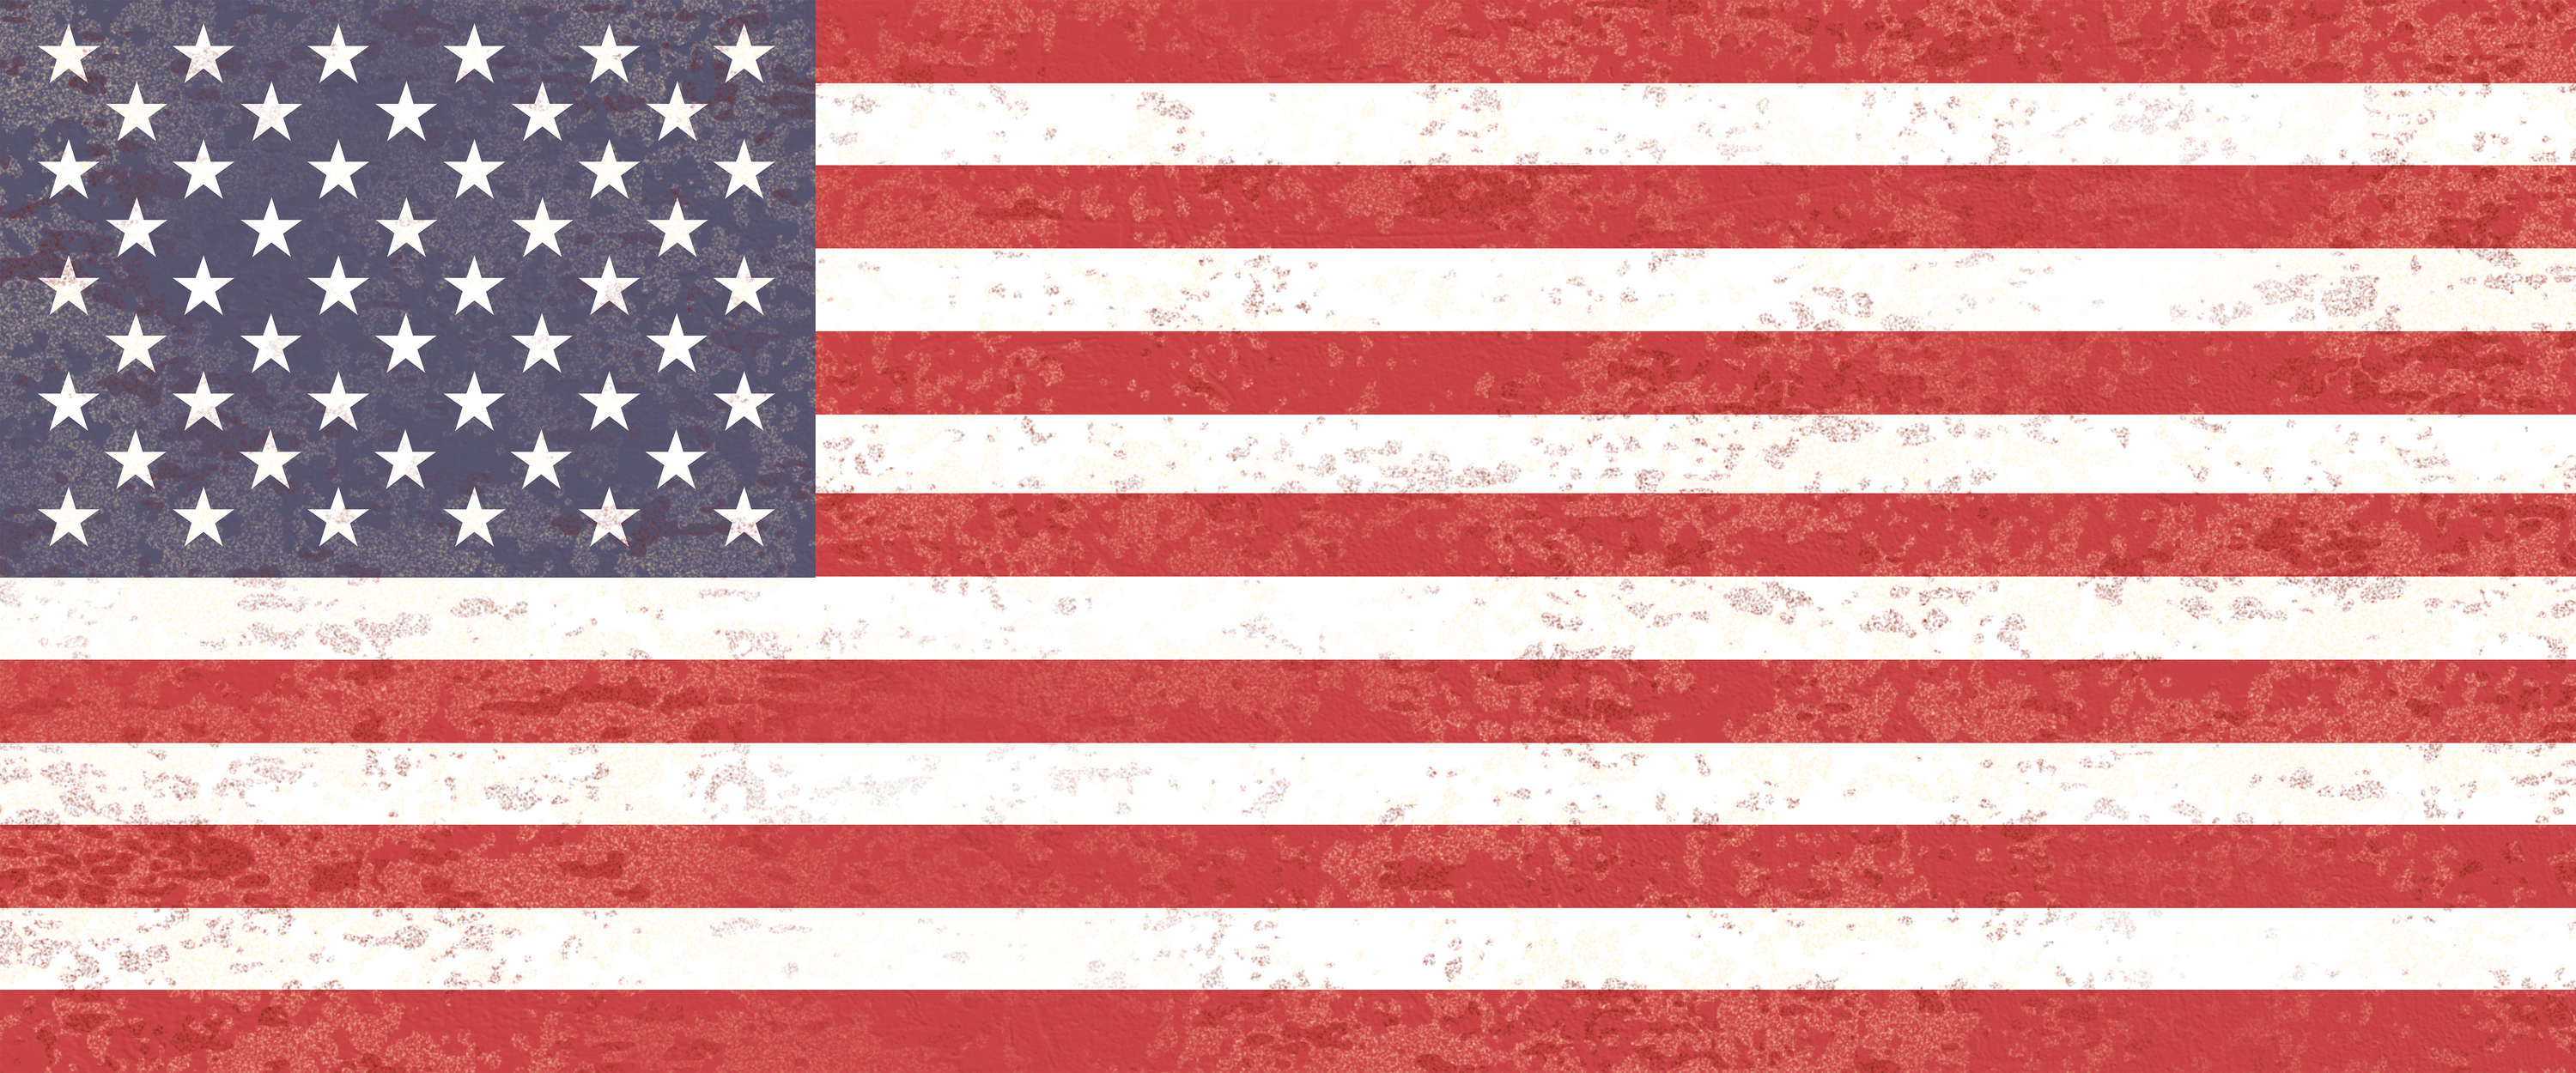             American flag mural - stars and stripes
        